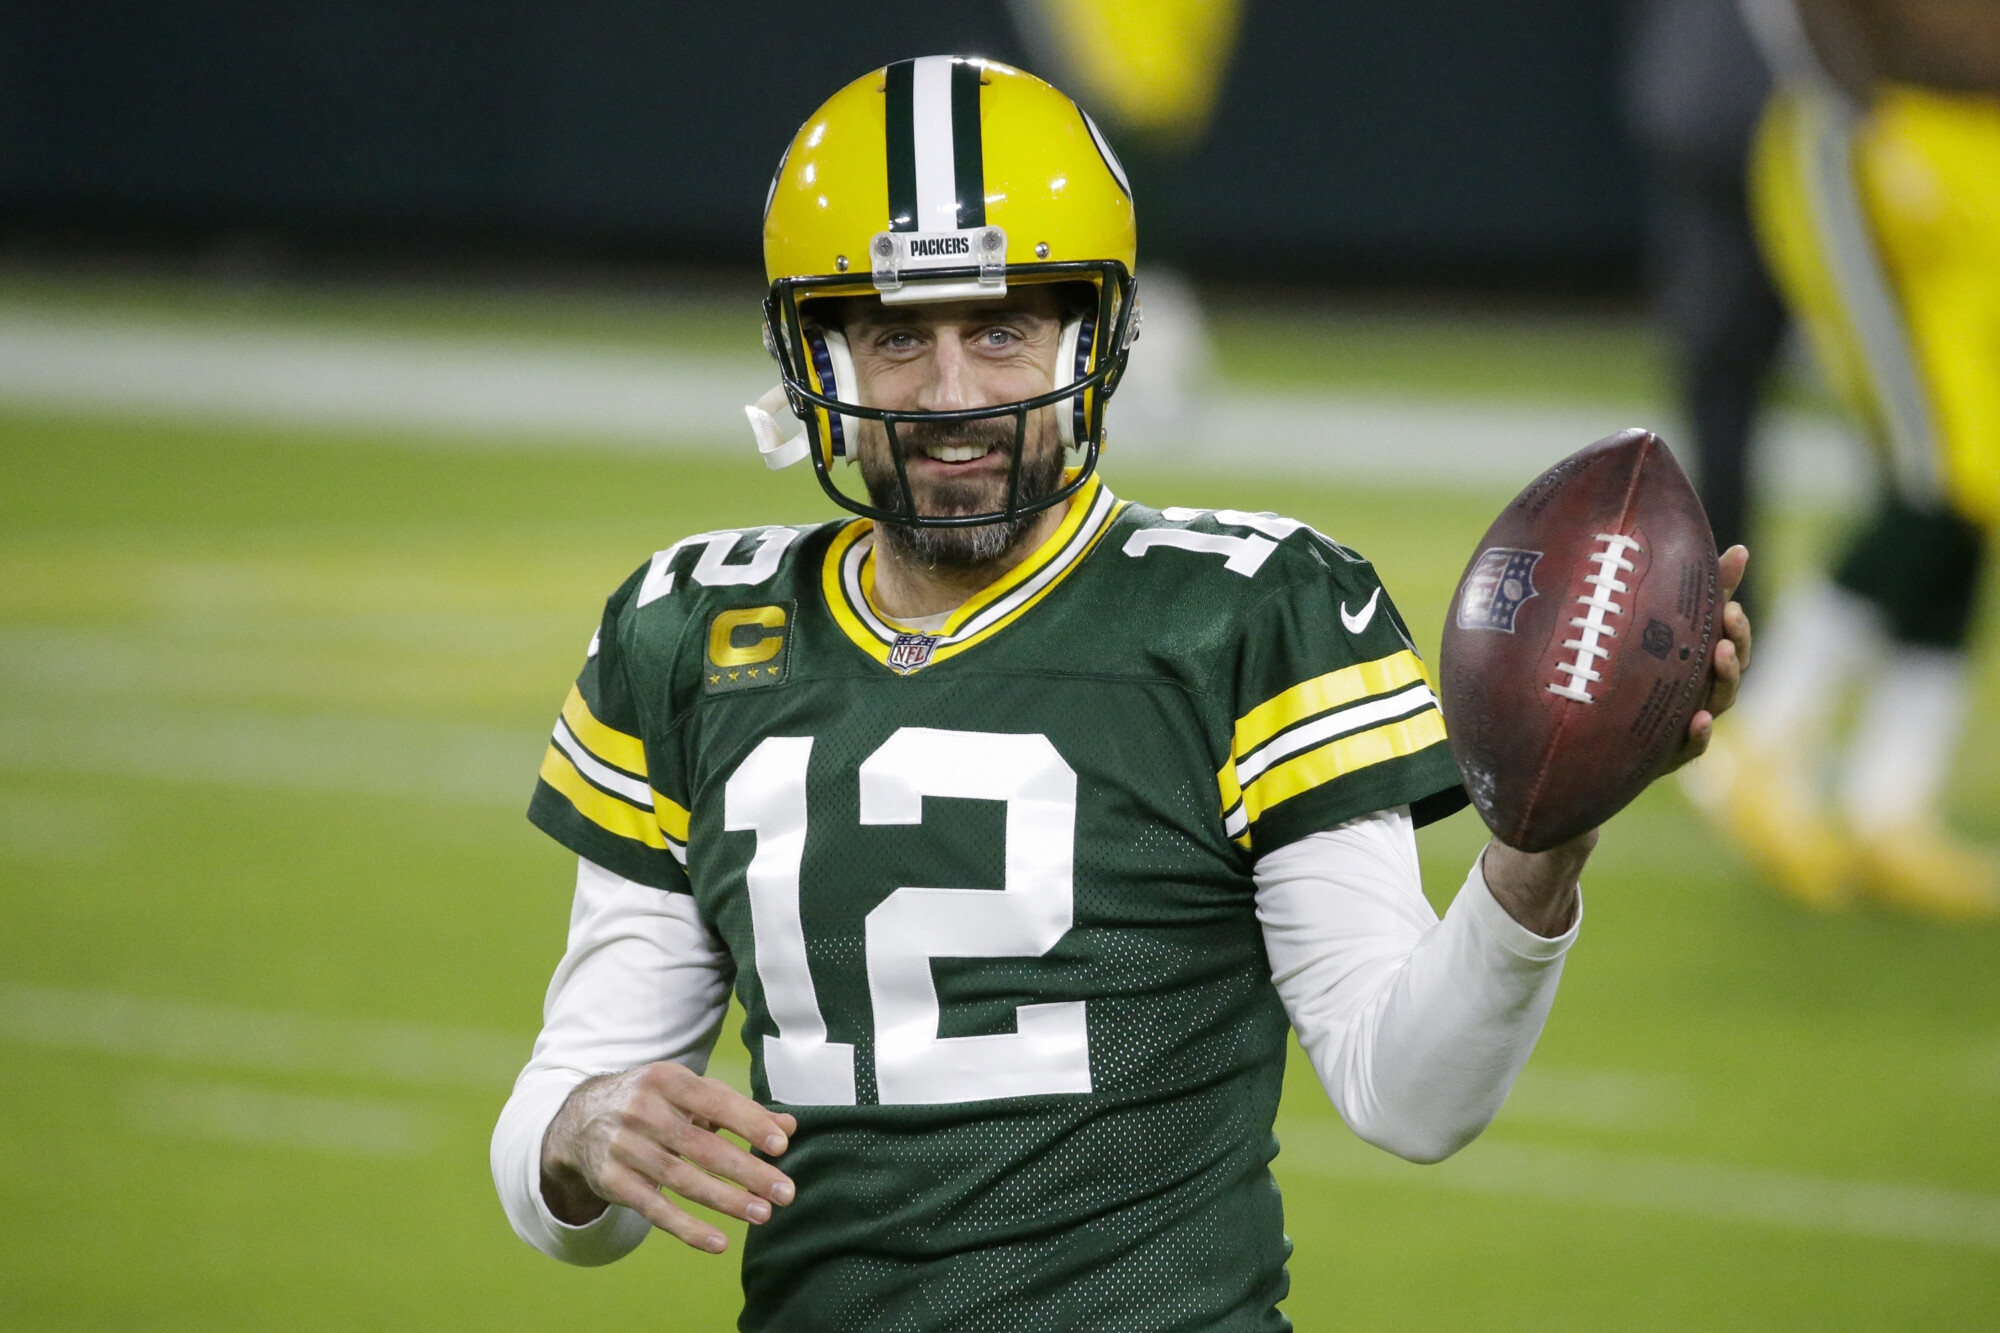 Aaron Rodgers and Prevea Health End 9-Year Partnership After His Comments on COVID-19 Vaccines